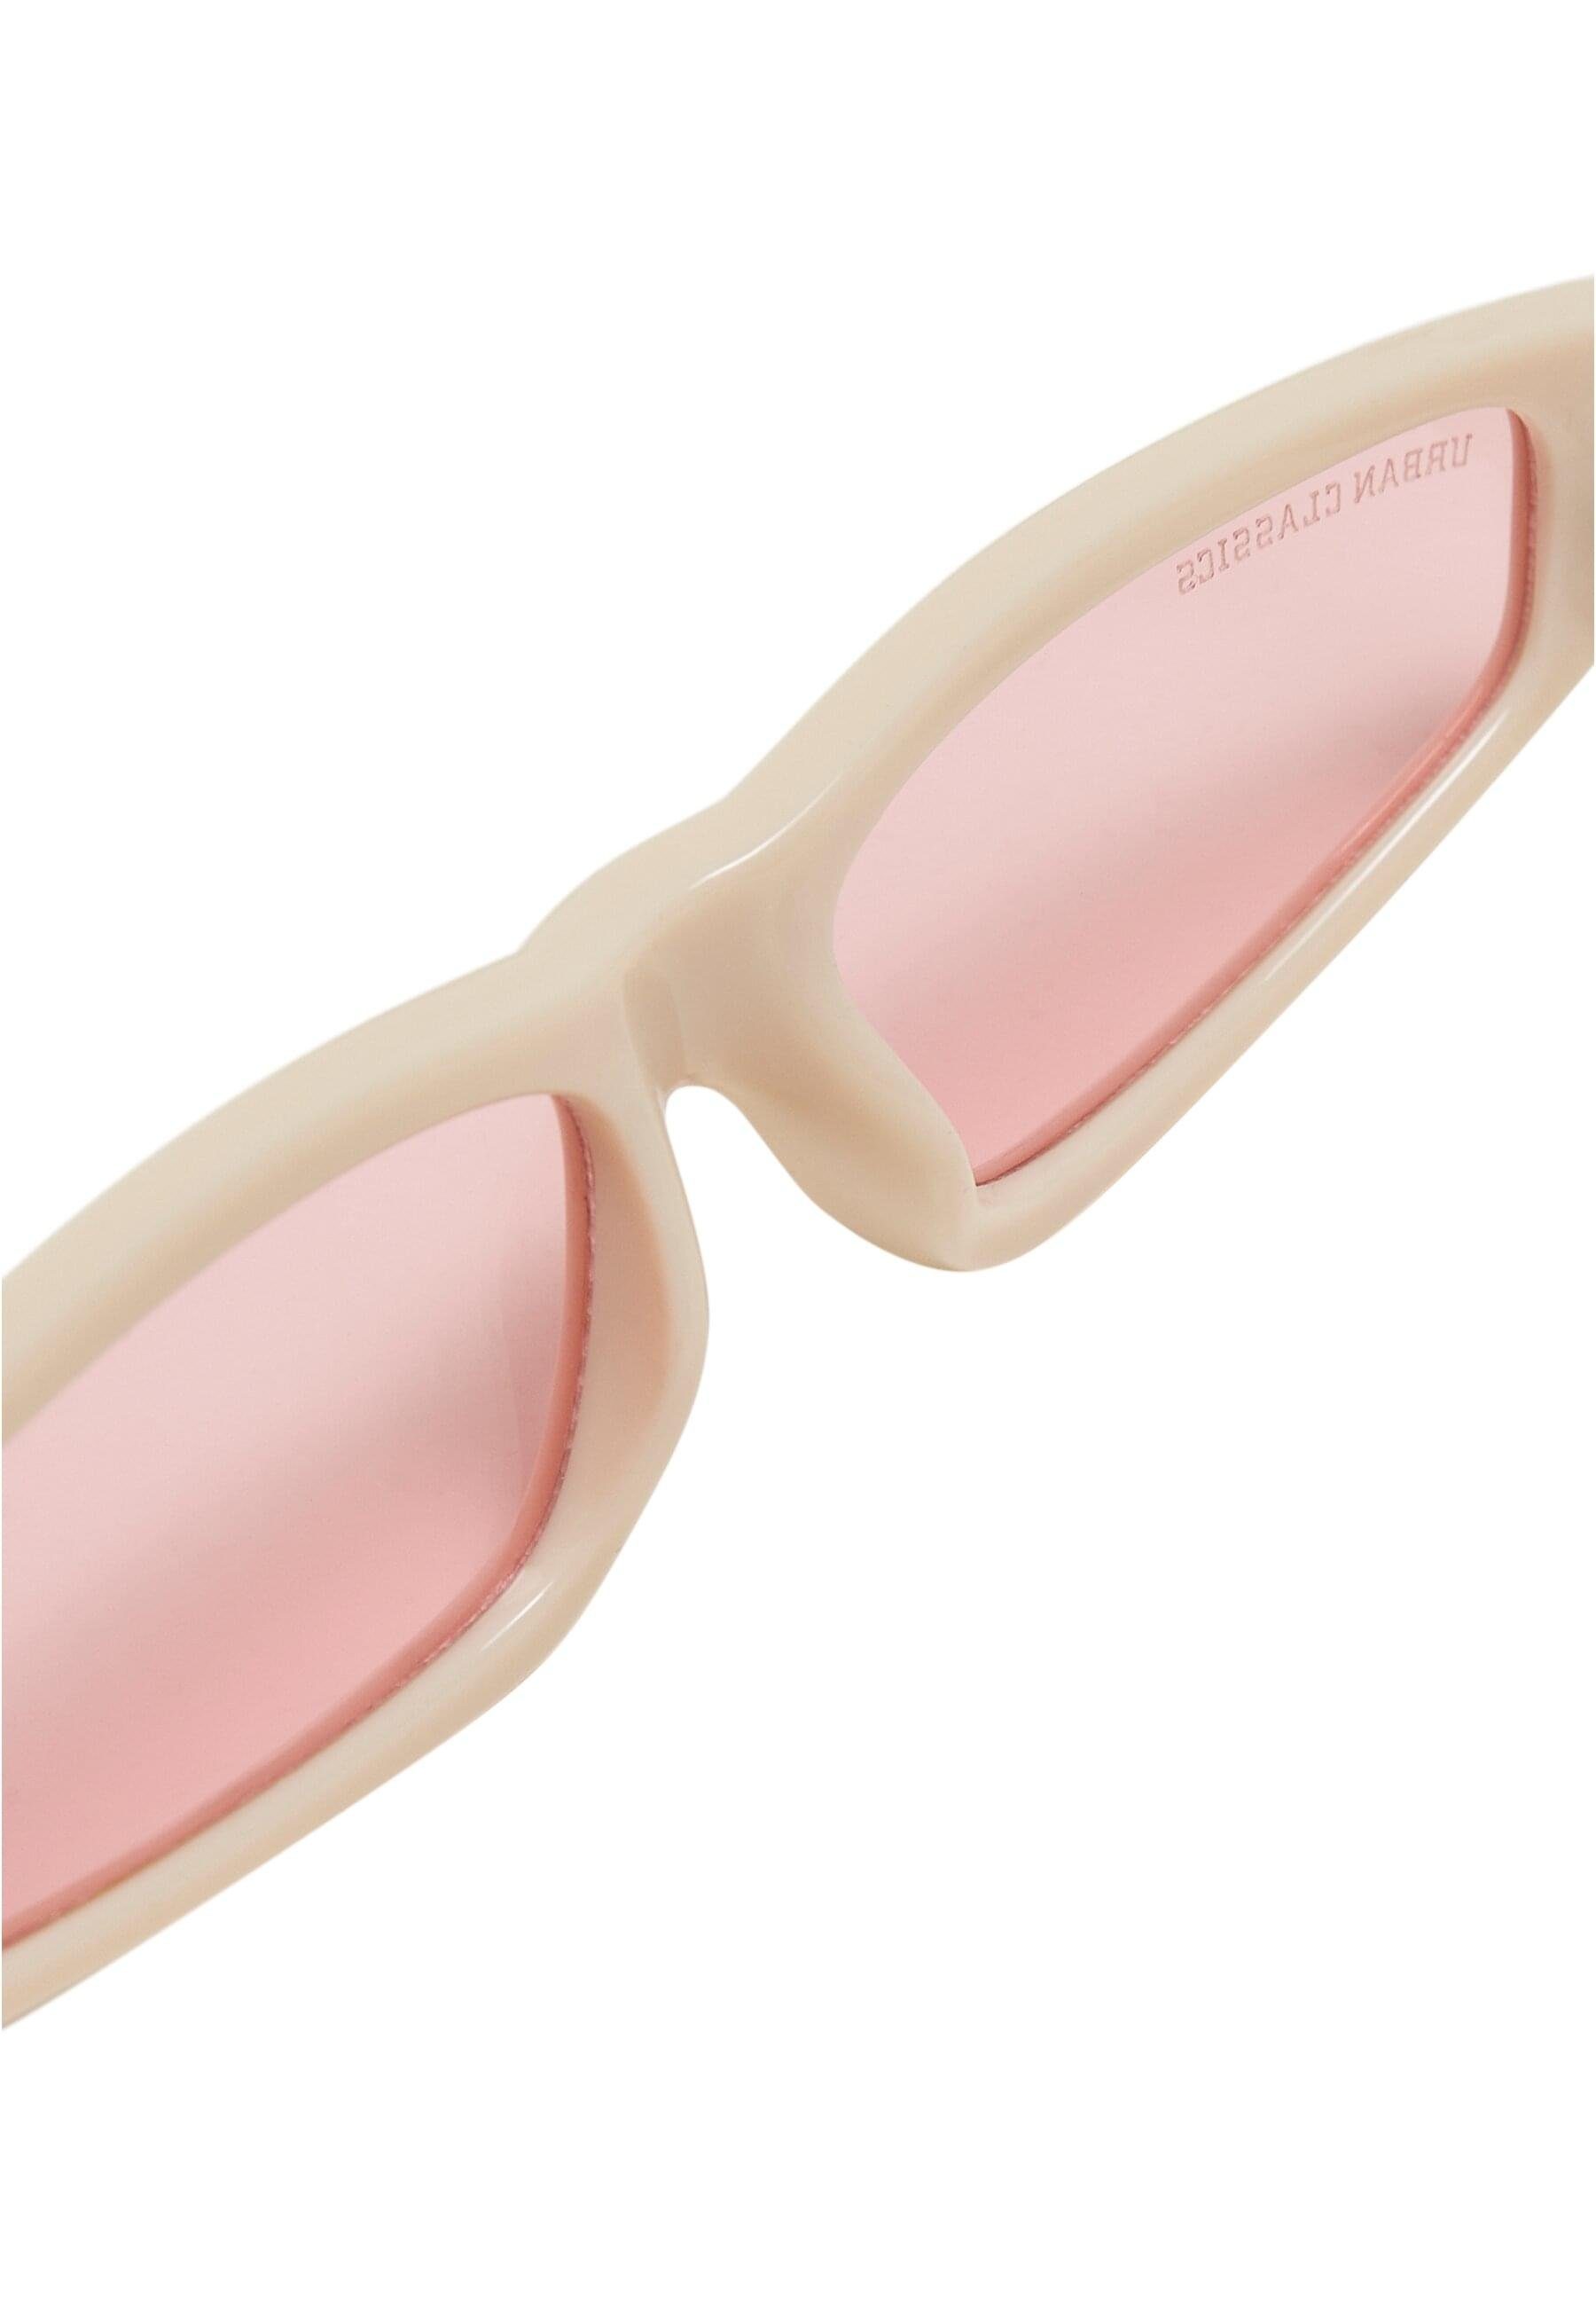 URBAN brown/brown+offwhite/pink Lefkada Sonnenbrille Unisex Sunglasses 2-Pack CLASSICS